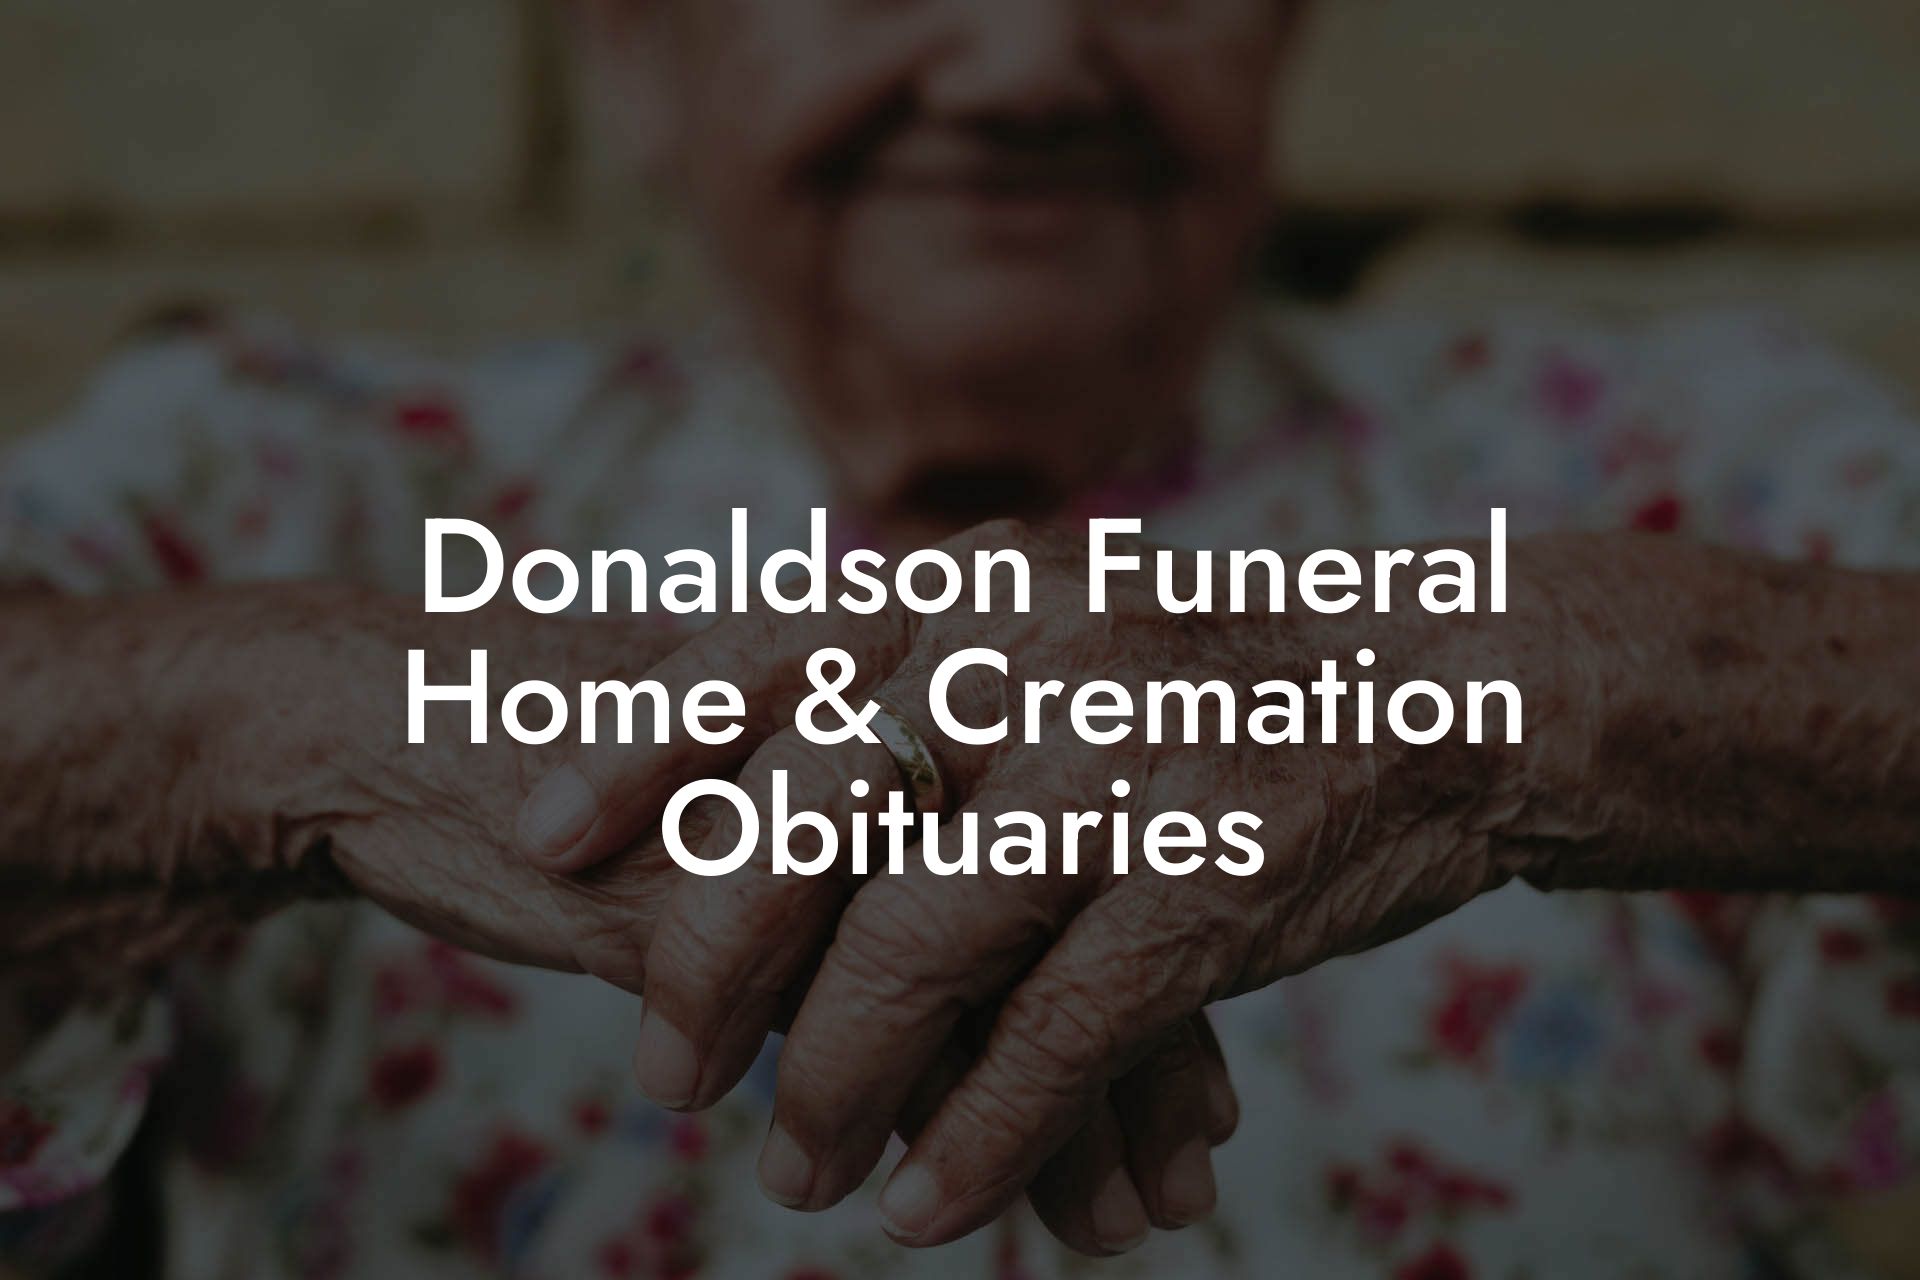 Donaldson Funeral Home & Cremation Obituaries - Eulogy Assistant